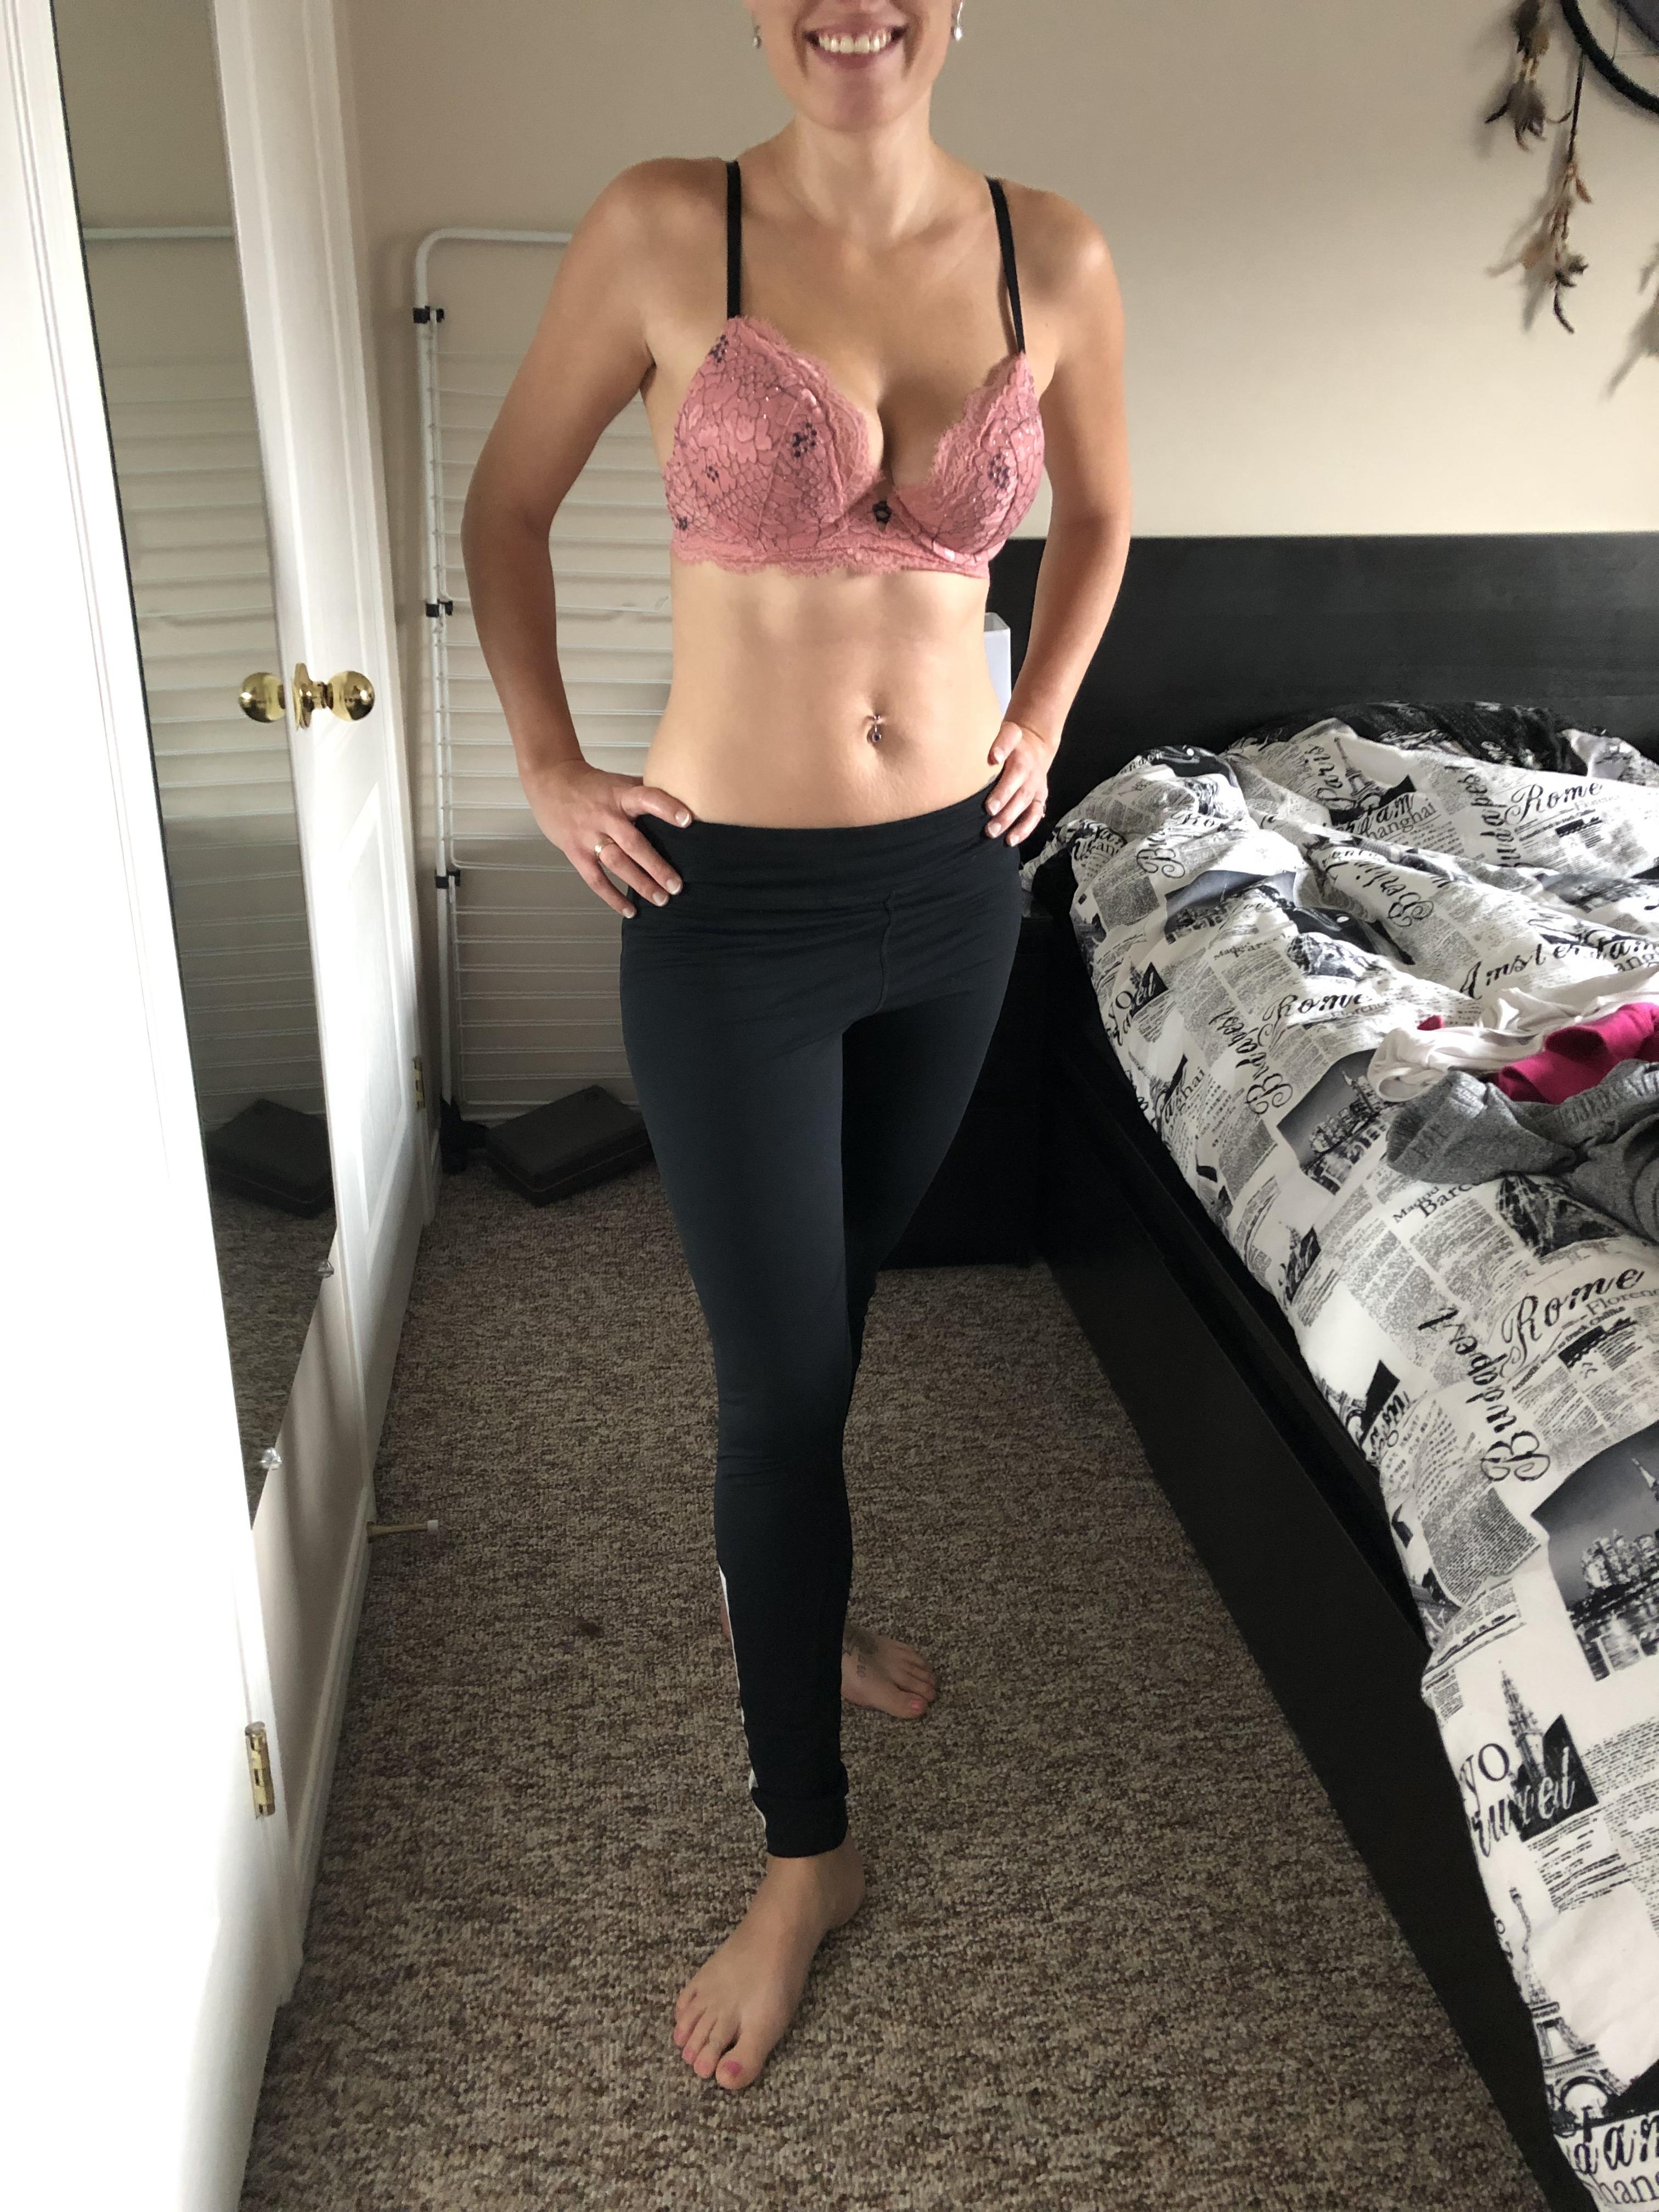 This MILF is ready to take on the day!! Think you can handle her?? (F32)